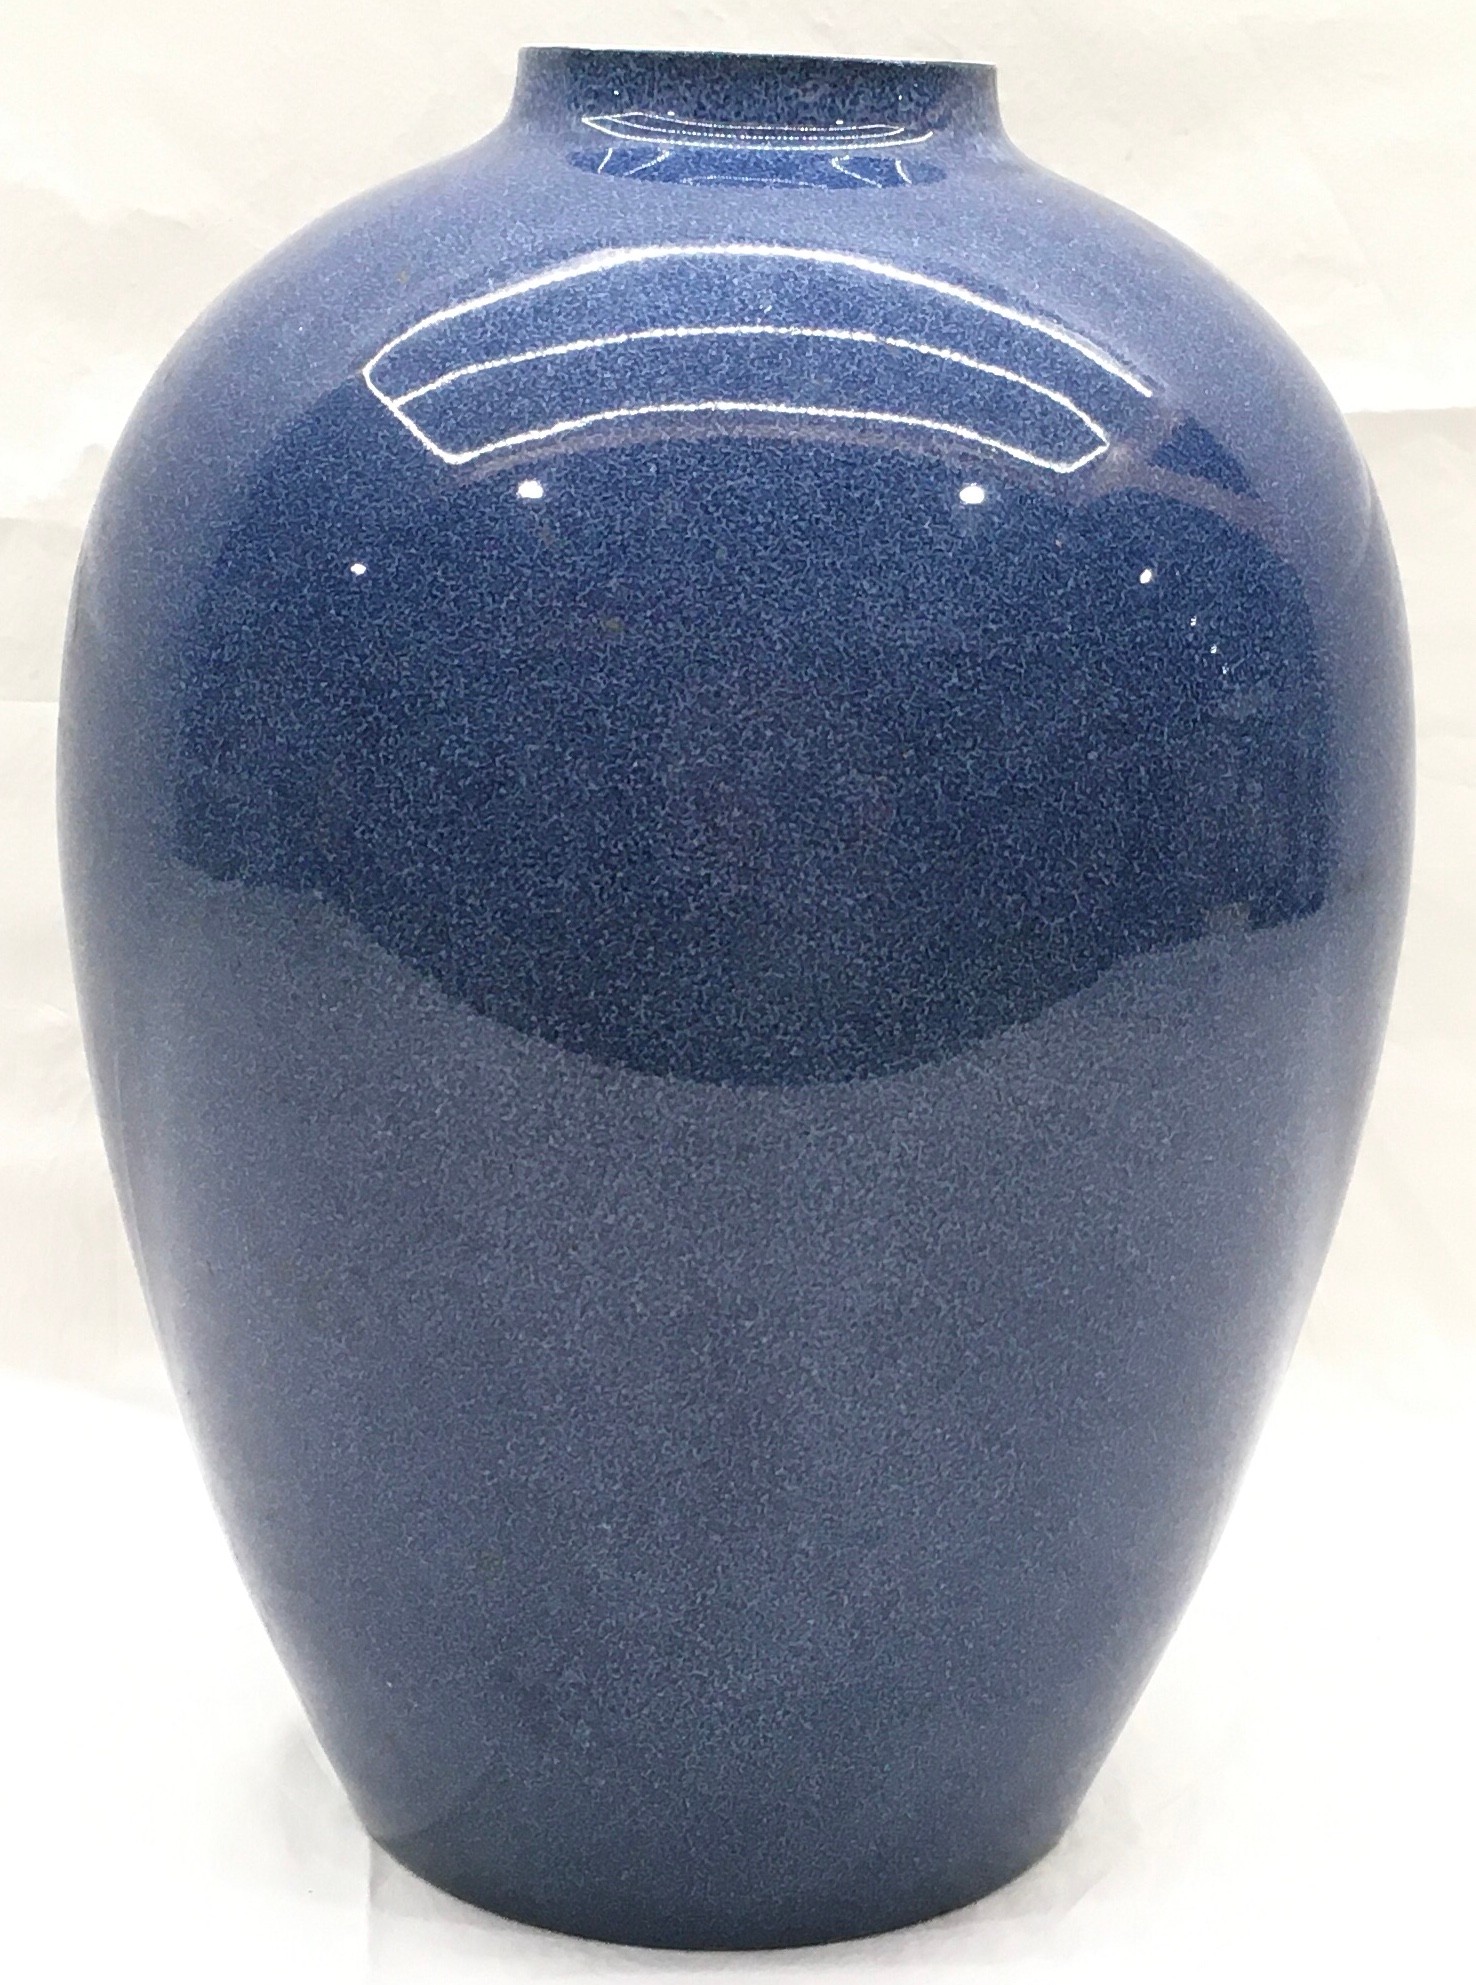 Large Royal Doulton vase in baluster form with blue crackle glaze decoration. Approx 12.5" tall